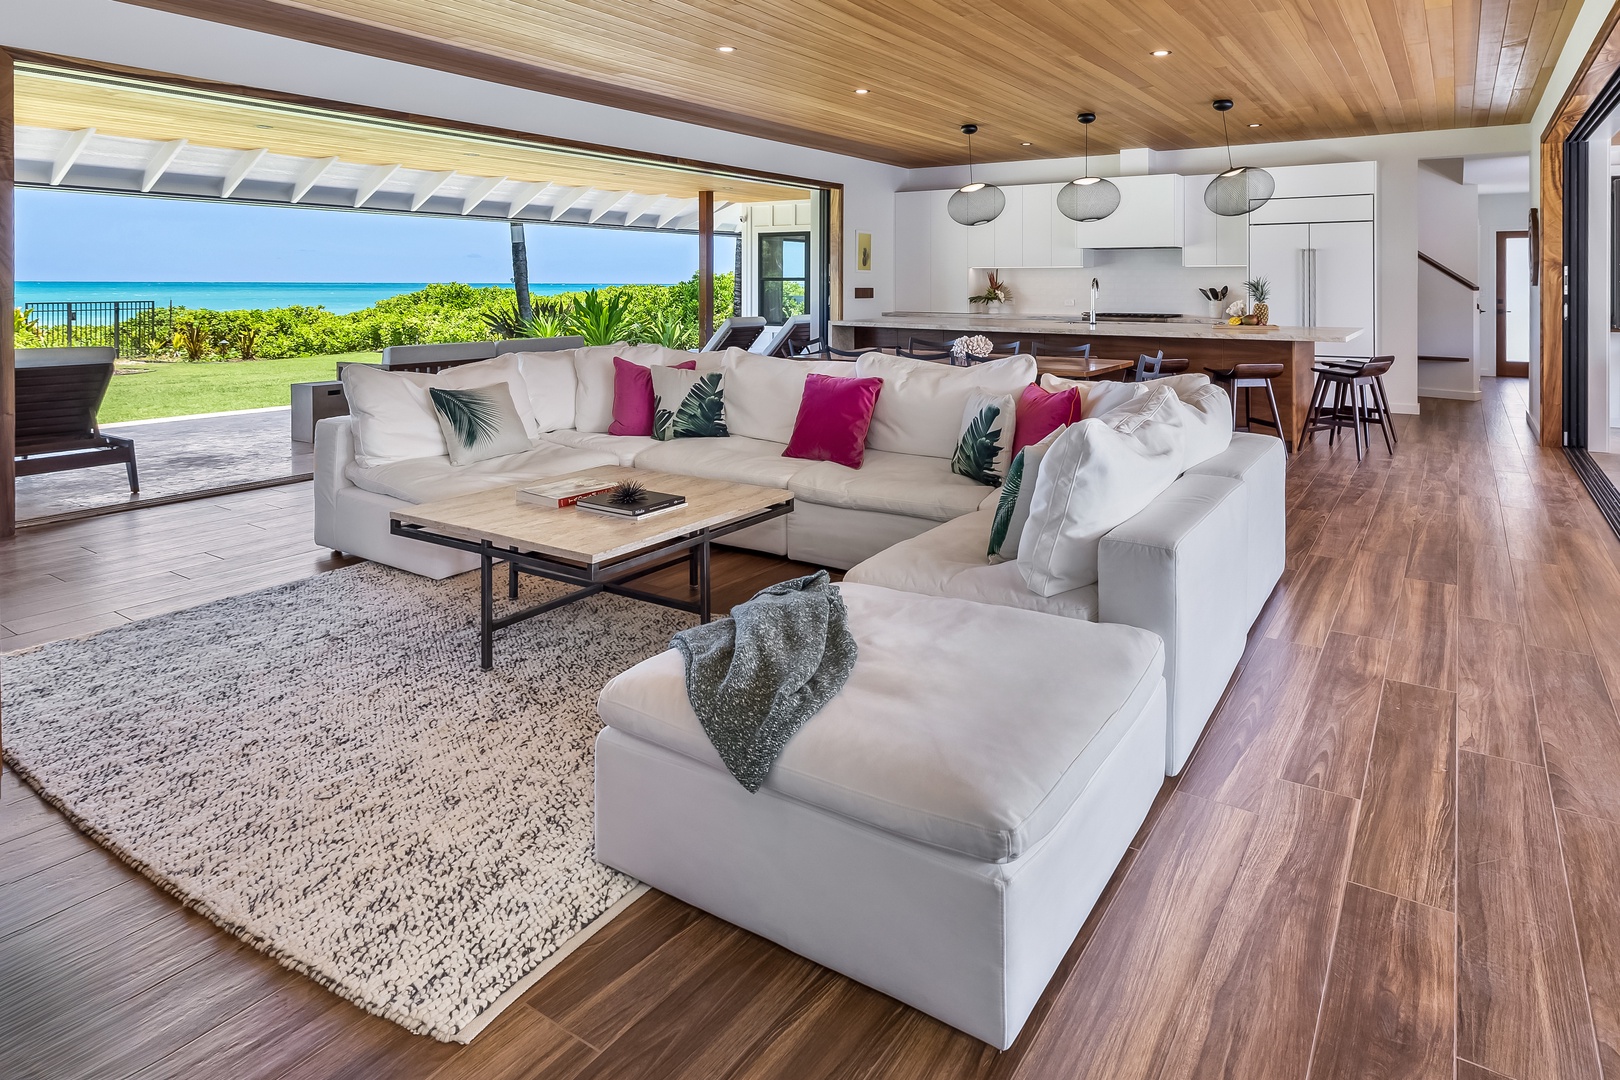 Kailua Vacation Rentals, Kailua Beach Villa - Seamless flow from the kitchen to dining and living spaces, perfect for entertaining and relaxation.